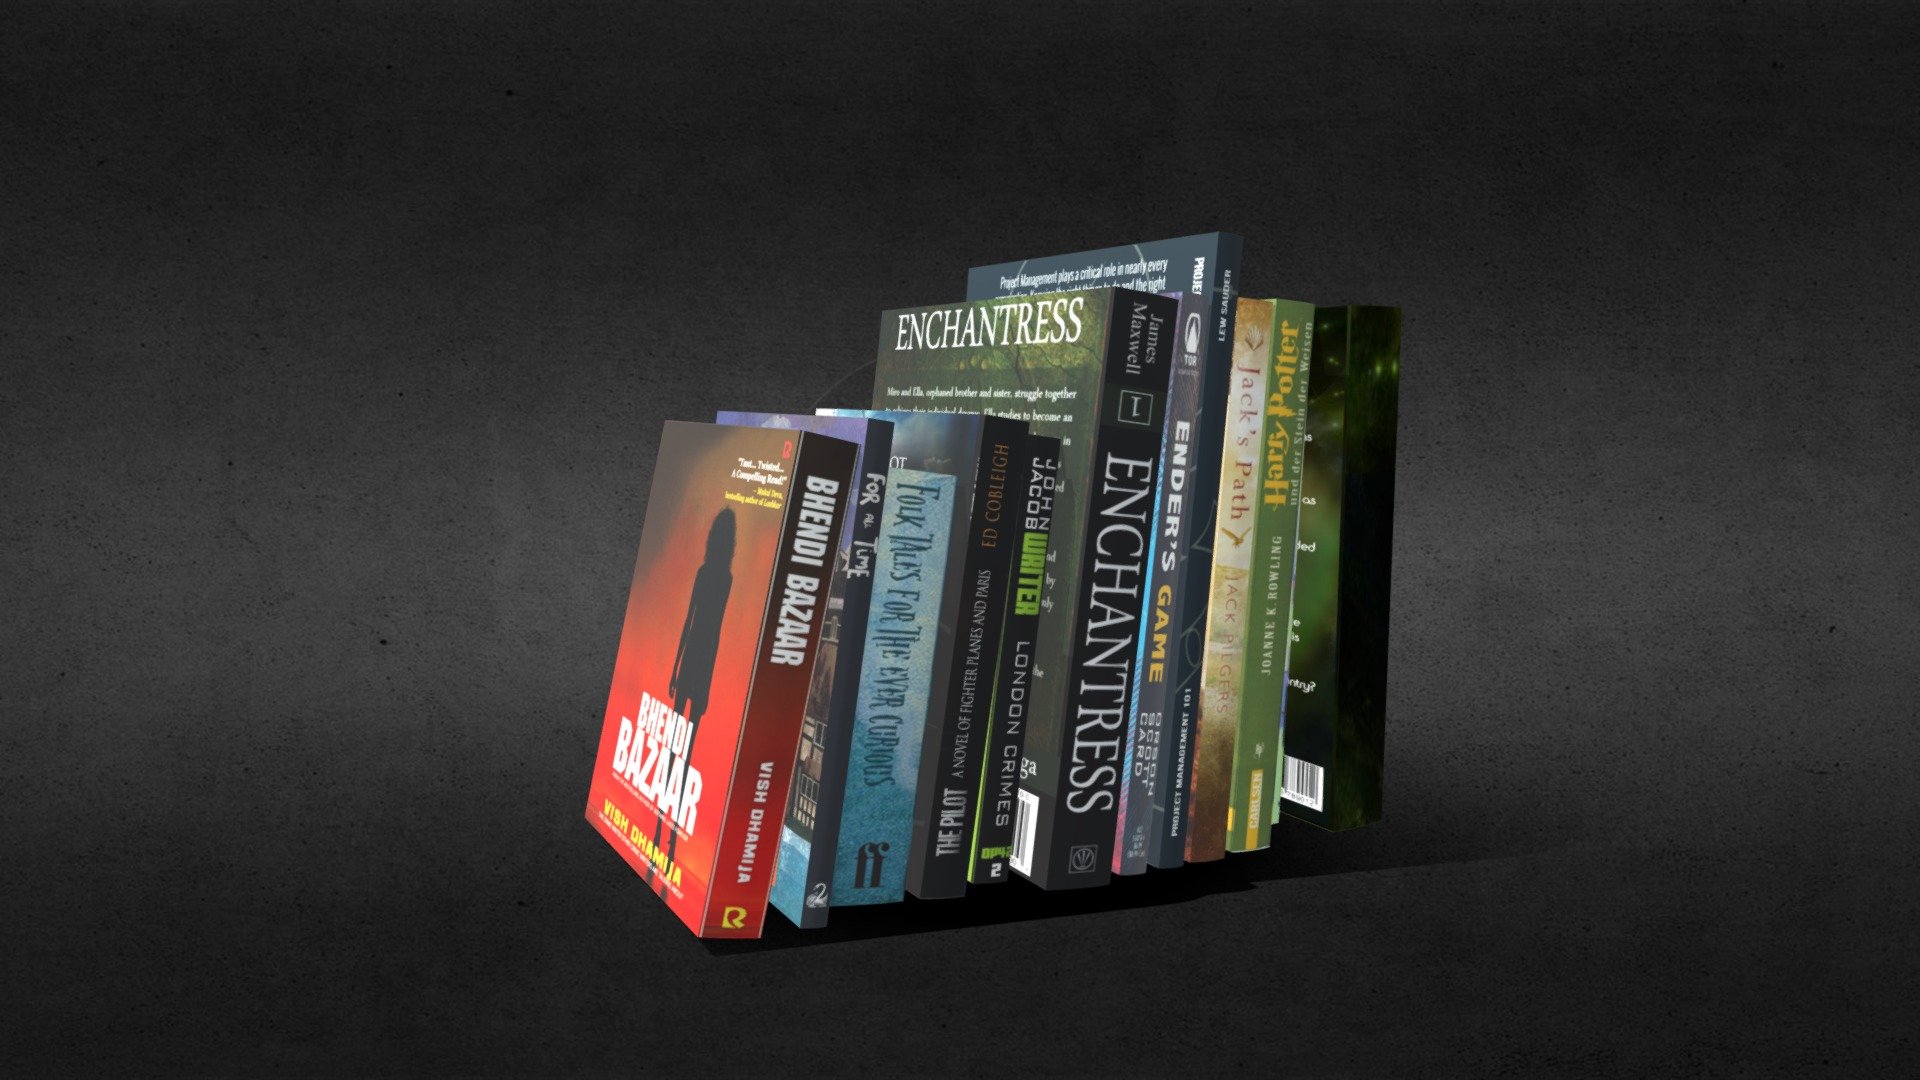 Super LOWPOLY 3D Books Set for Gamification &amp; Architecture Visualization for VR / AR projects. (UVW, Texture and NormalMap).

Modelling &amp; UVW unwrapped in 3DS Max, Textured in Substance Painter 3d model